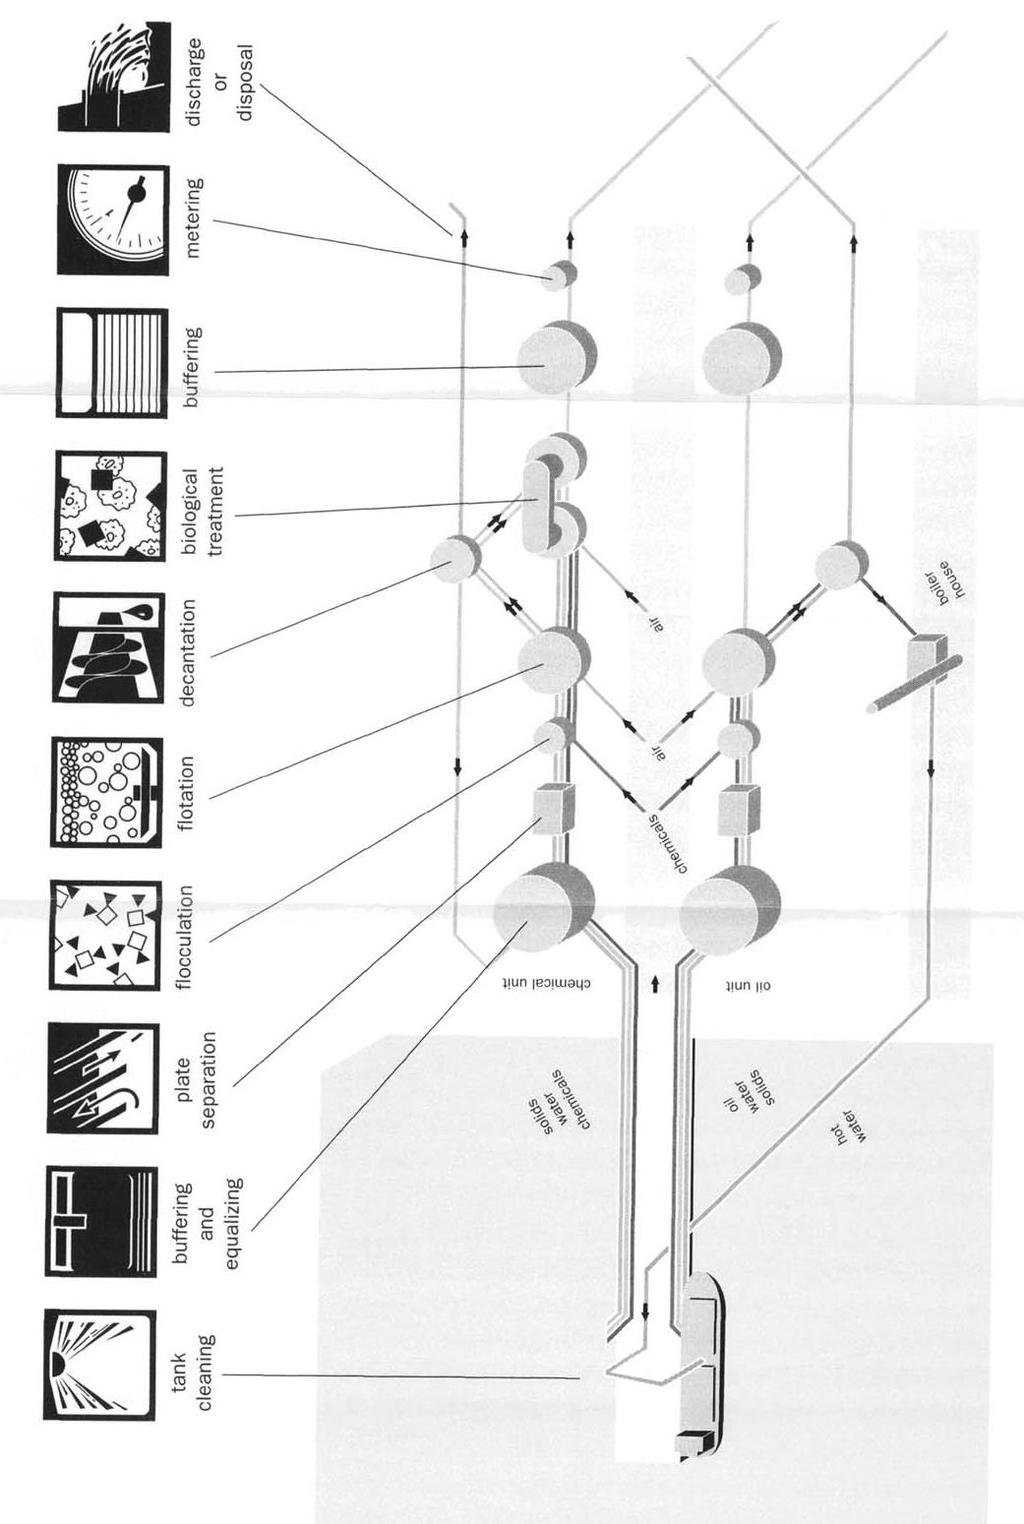 Annex 2, page 100 Figure 18 Typical layout